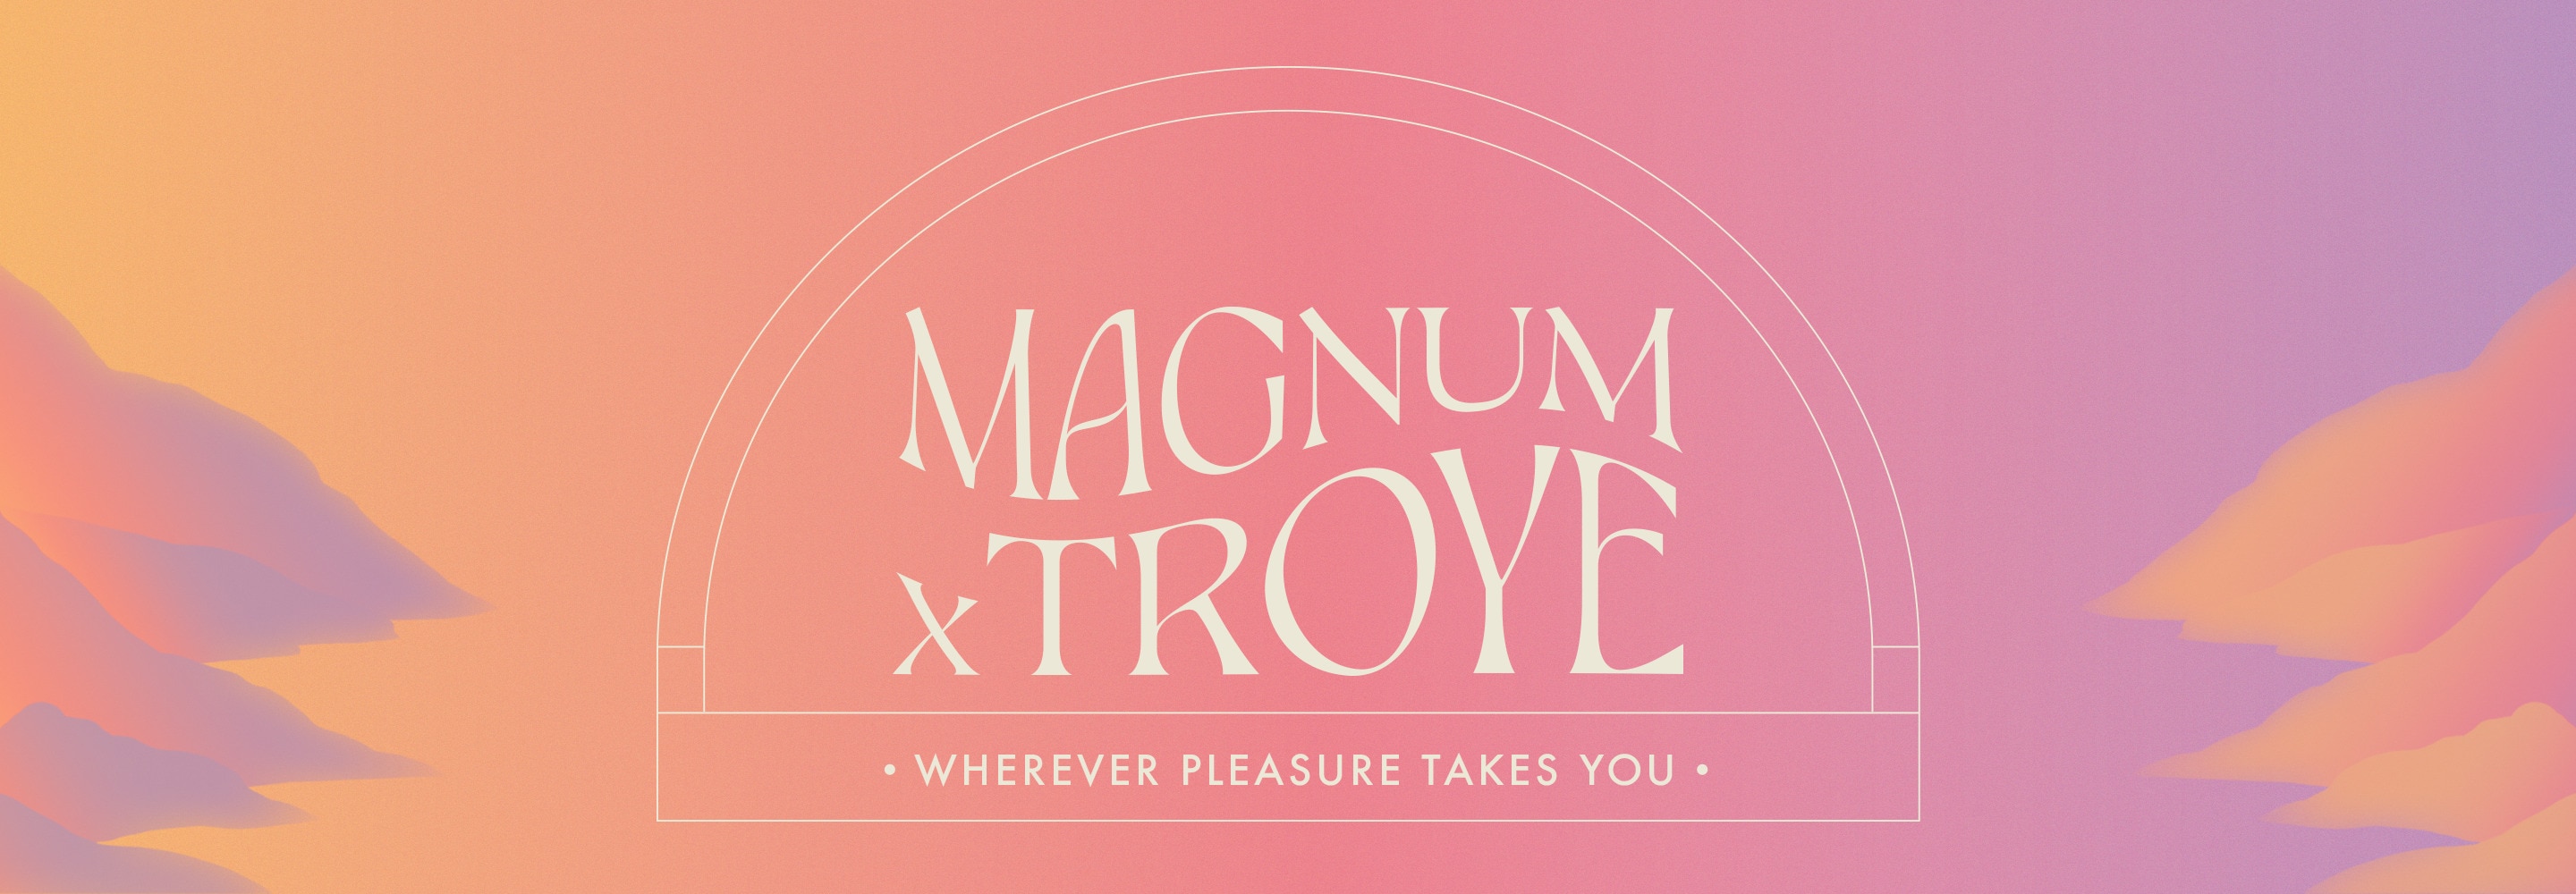 graphic 'Troye x Magnum' wavey title inside an arch, subline 'wherever pleasure takes you', surrounded by mountain illustrations on pink and purple background